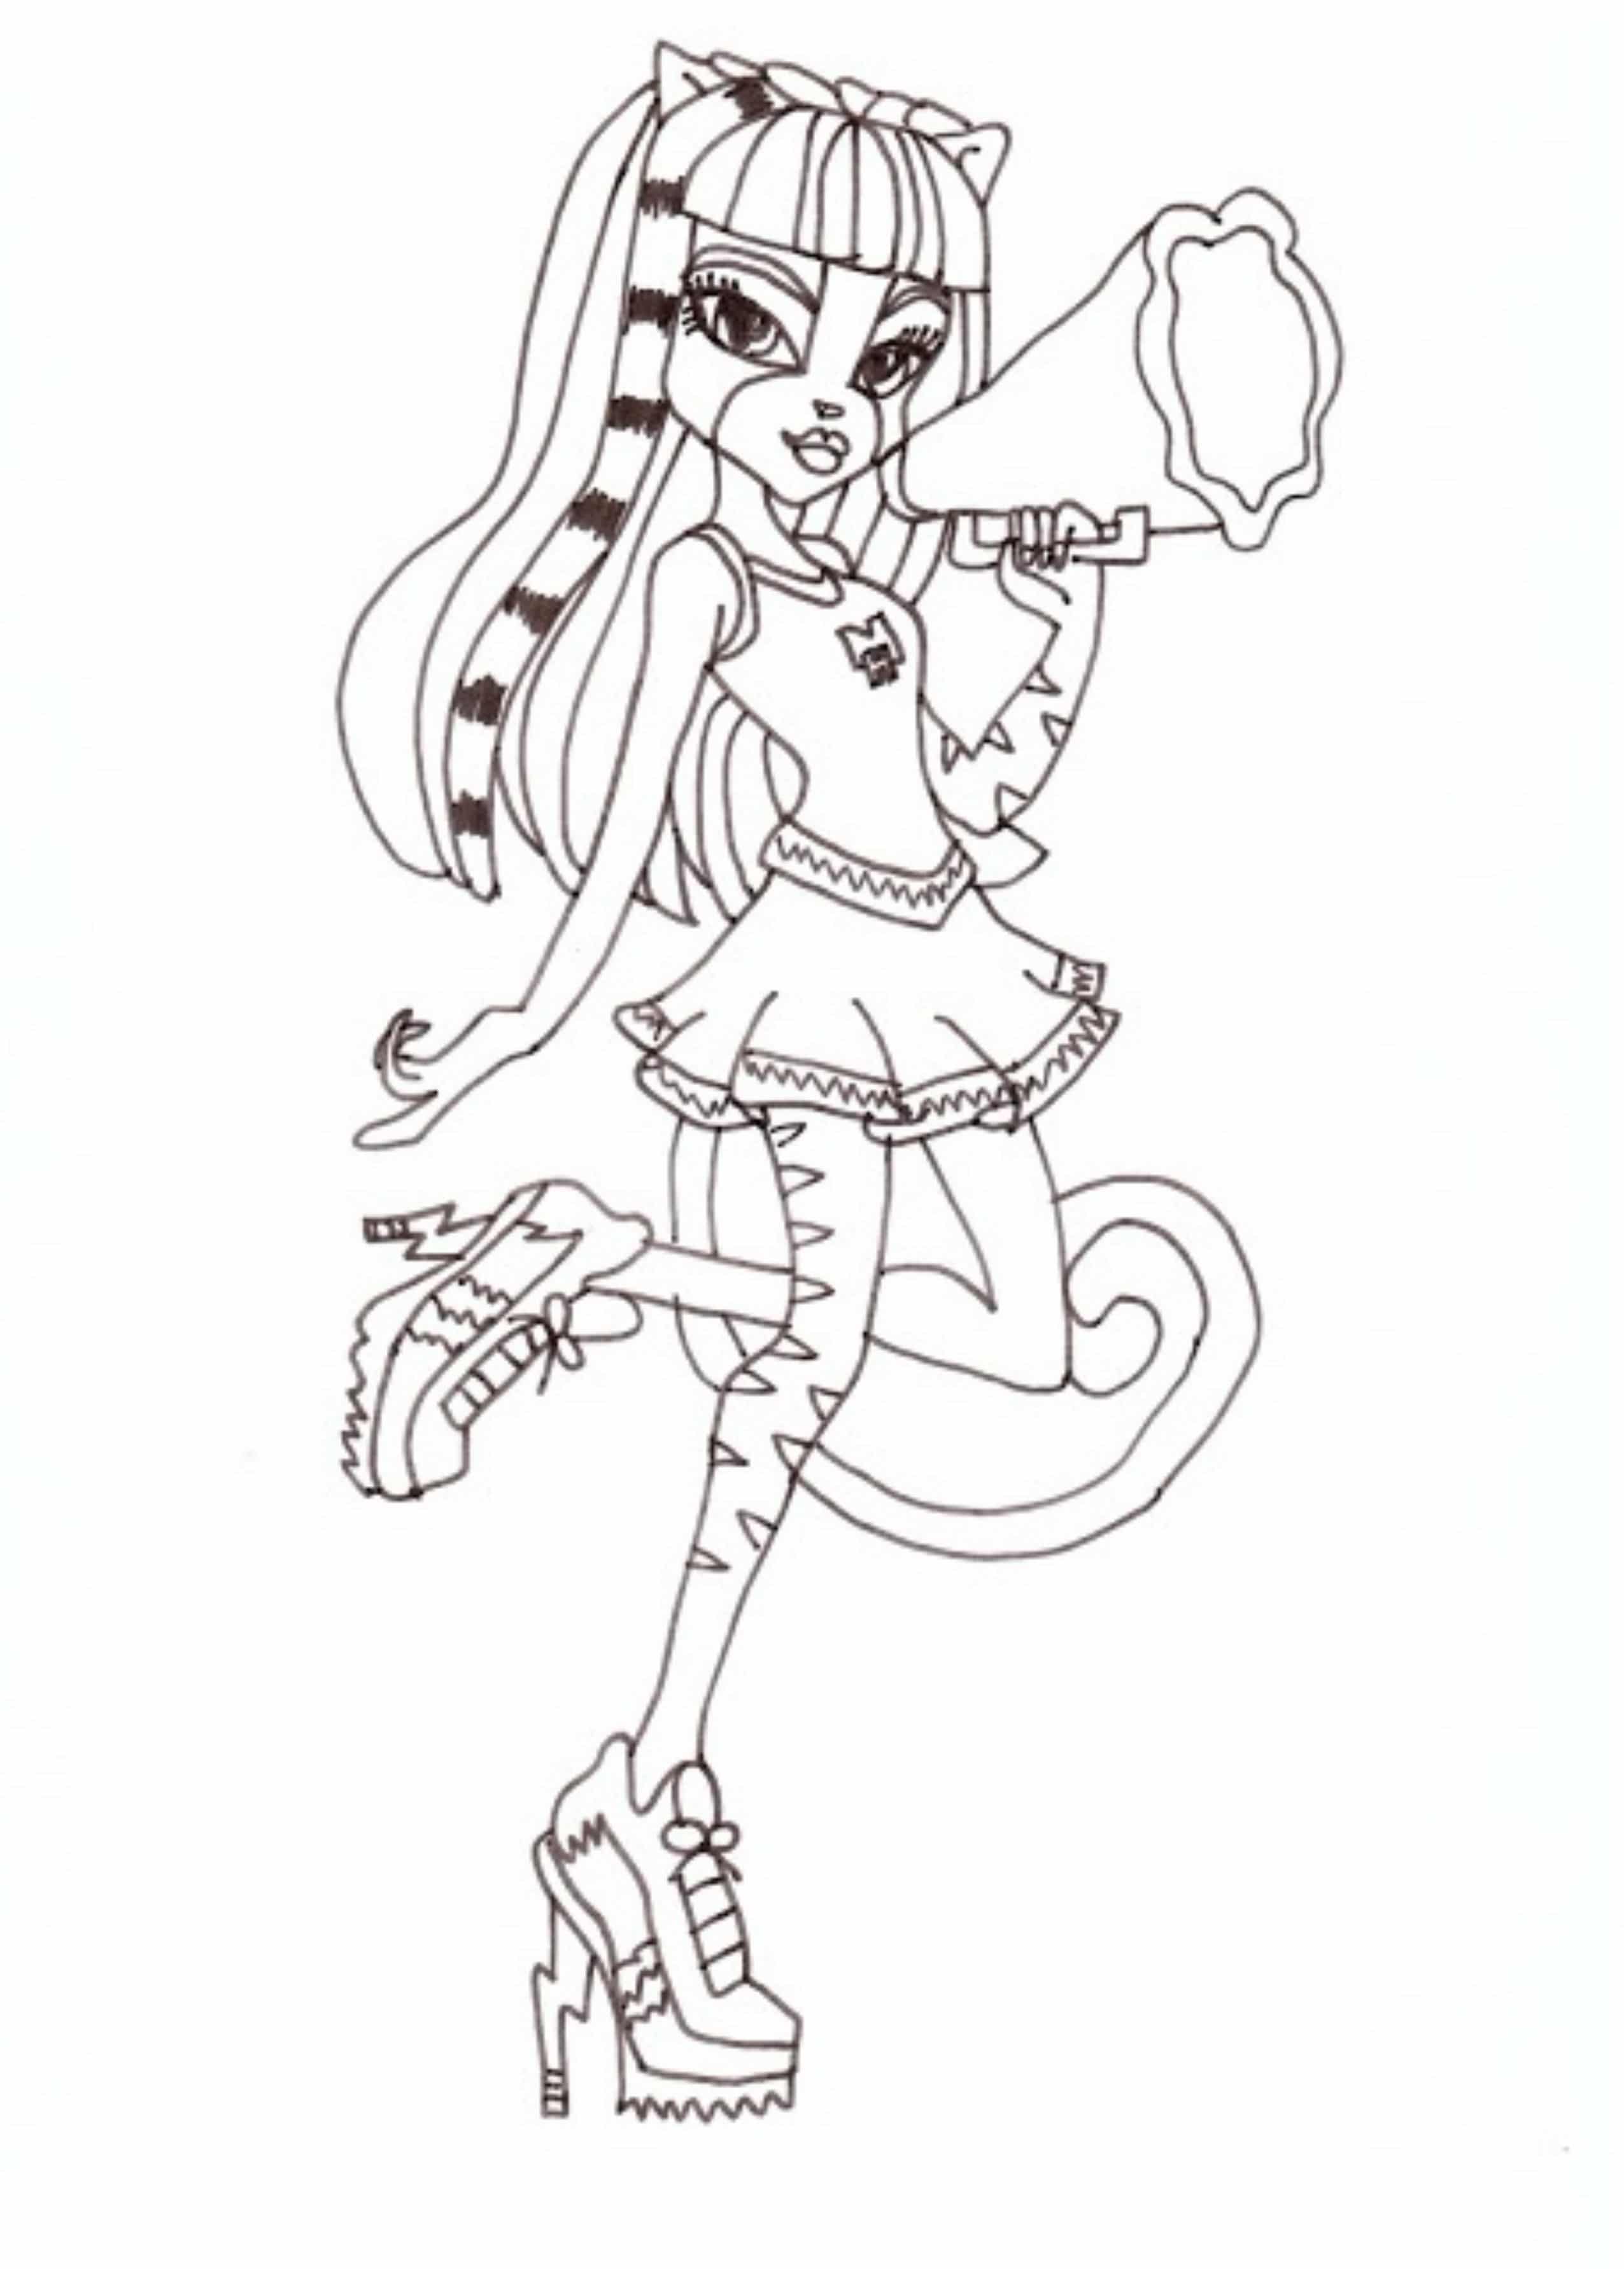 Print & Download Monster High Coloring Pages Printable for Your Kids